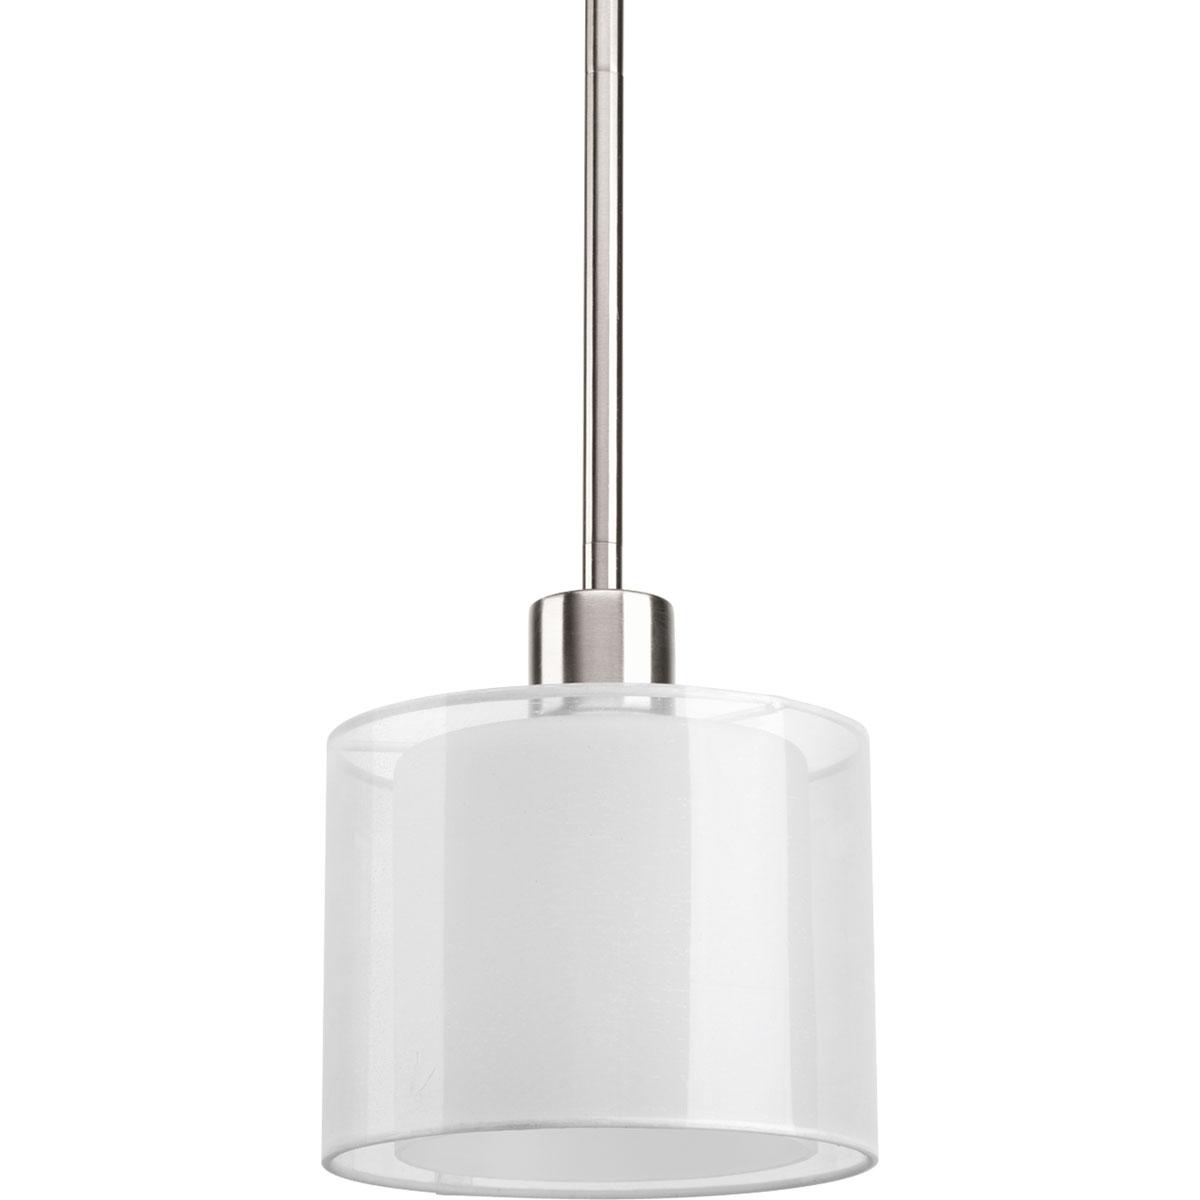 Hubbell P5110-09 Invite the beauty of light into your home with this Brushed Nickel one-light mini-pendant. Invite provides a welcoming silhouette with a unique shade comprised of an inner glass globe encircled by a translucent sheer Mylar shade. The rich, layering effect